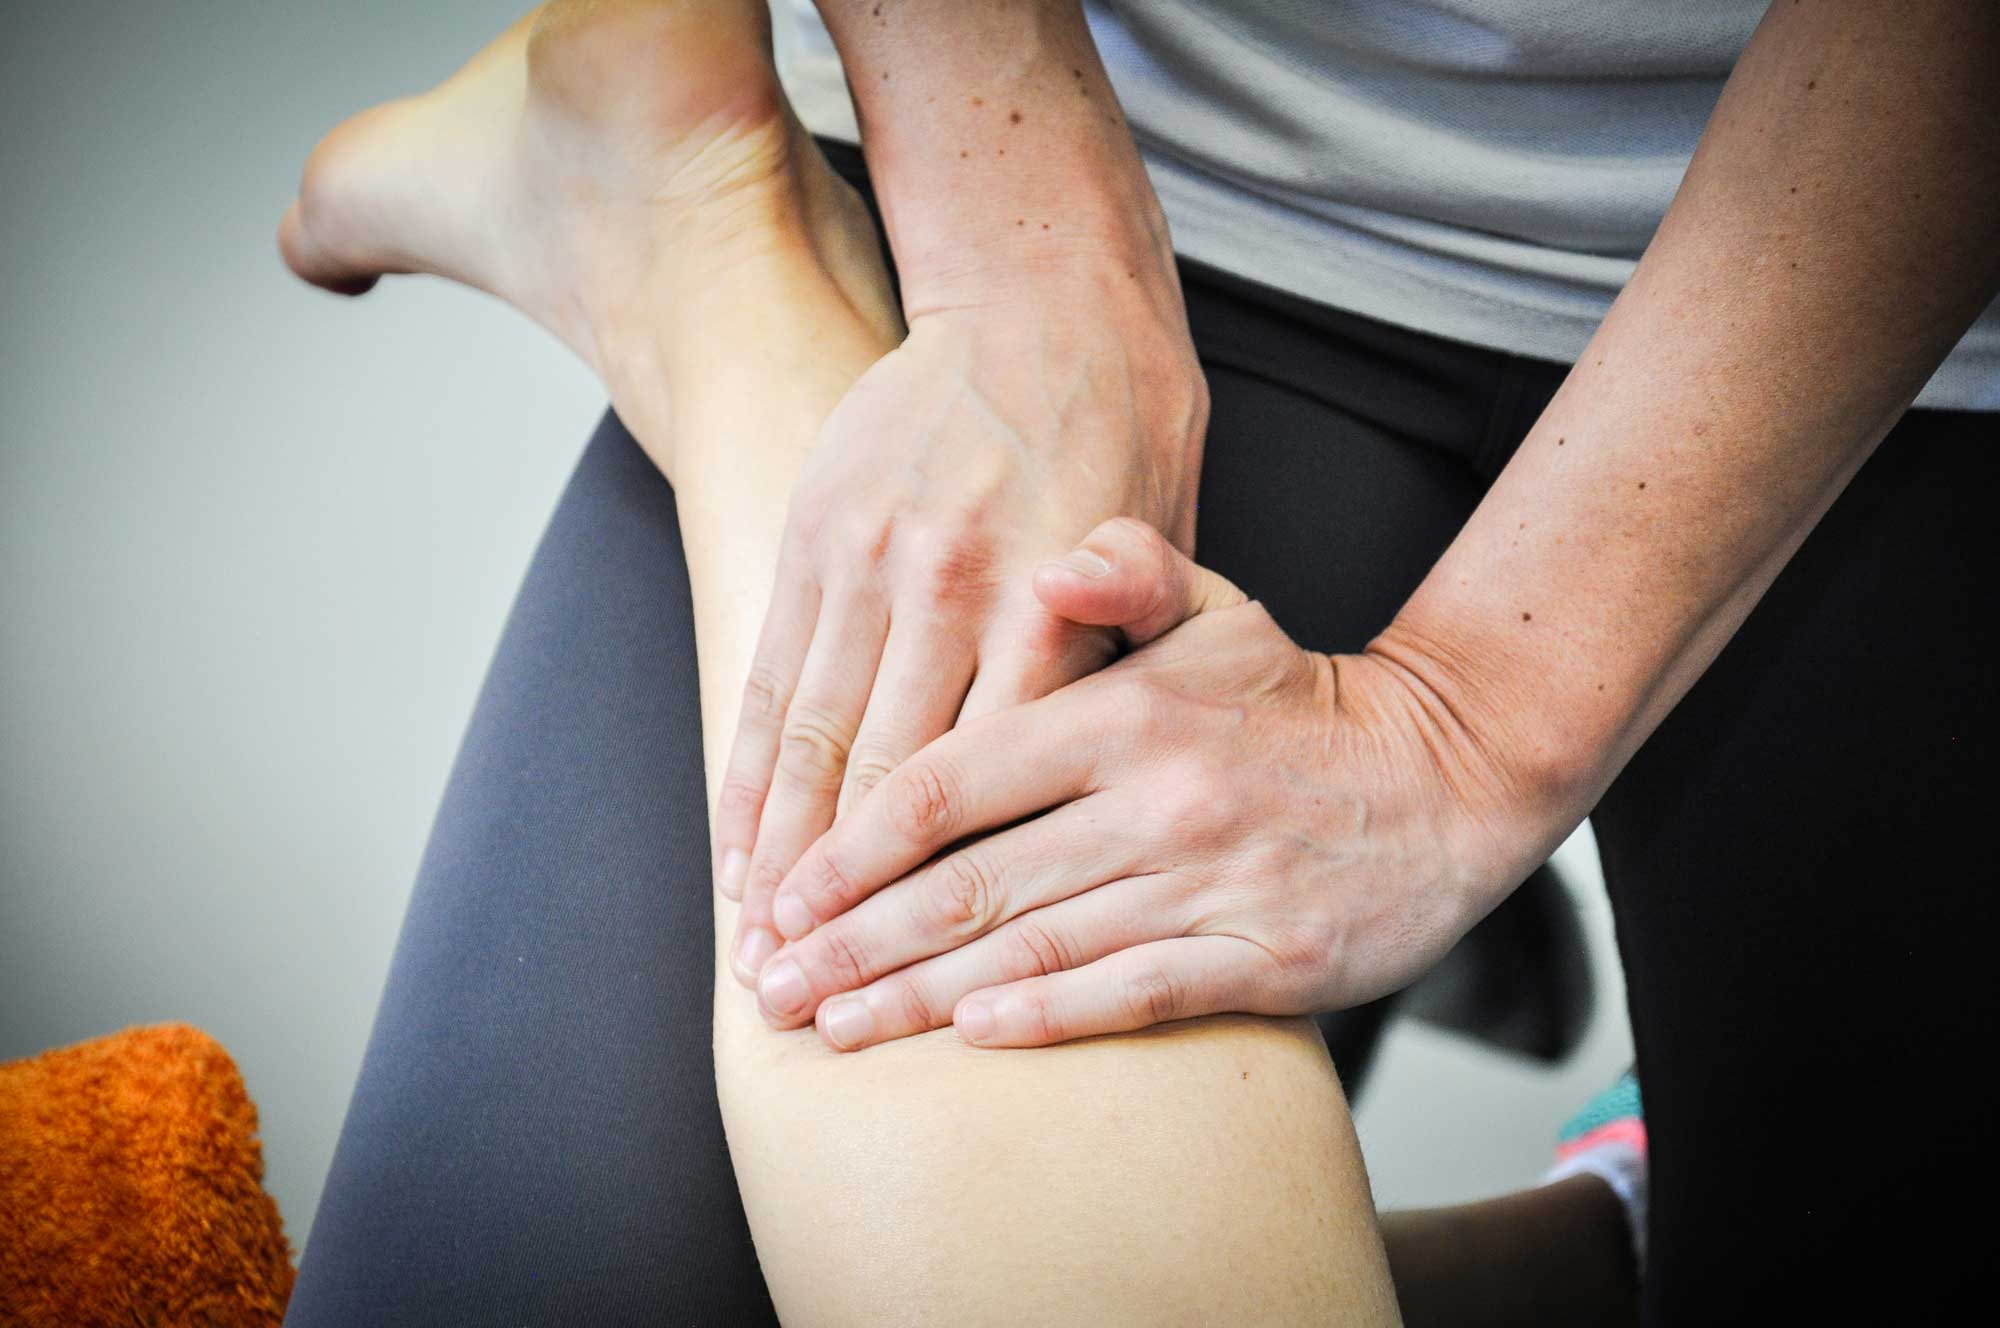 Square One - Sports Massage Therapy: Image showing practitioner massaging calf muscle of a patient